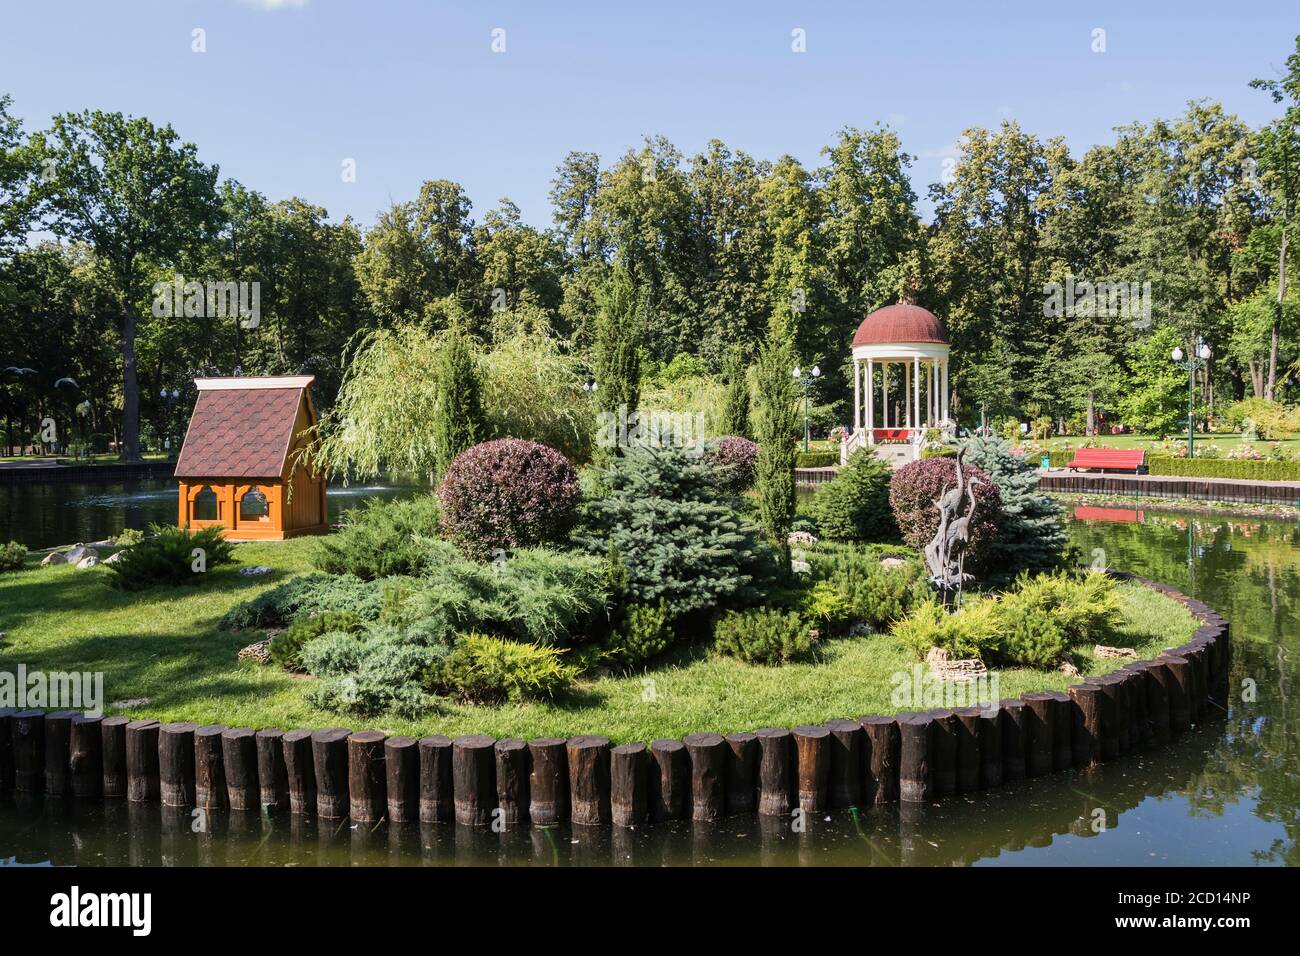 Landscape design with a pond and gazebo in the city park. Stock Photo